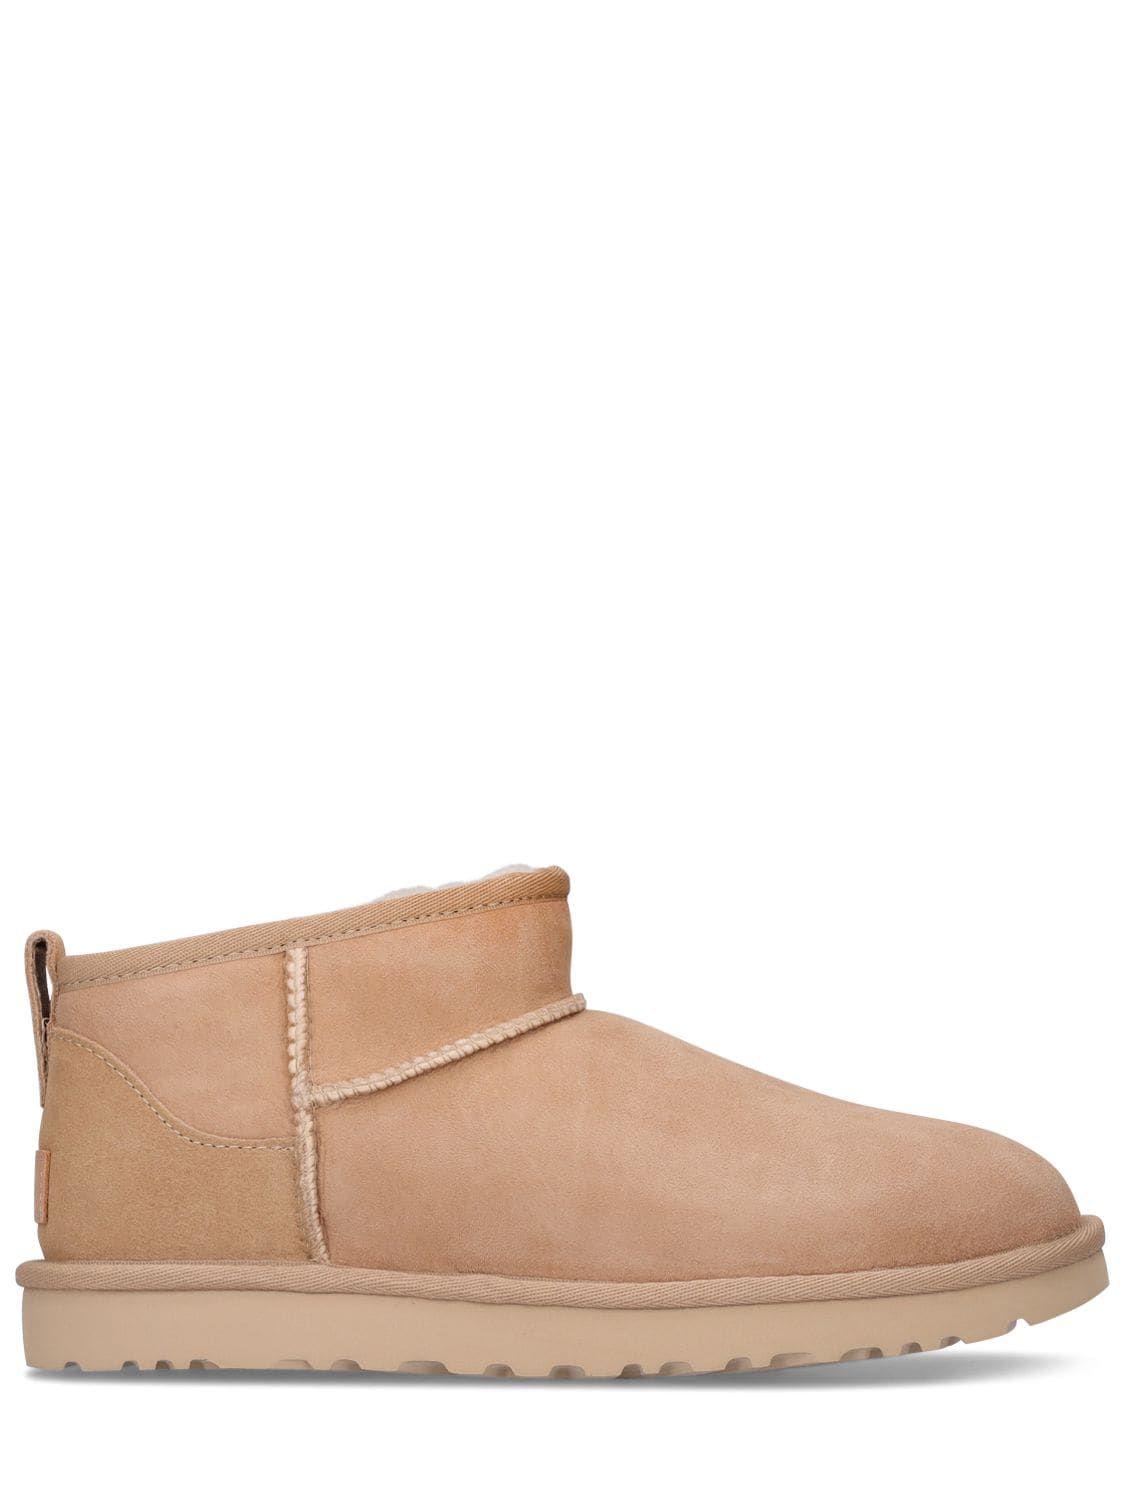 UGG 10mm Classic Ultra Mini Shearling Boots in Brown | Lyst